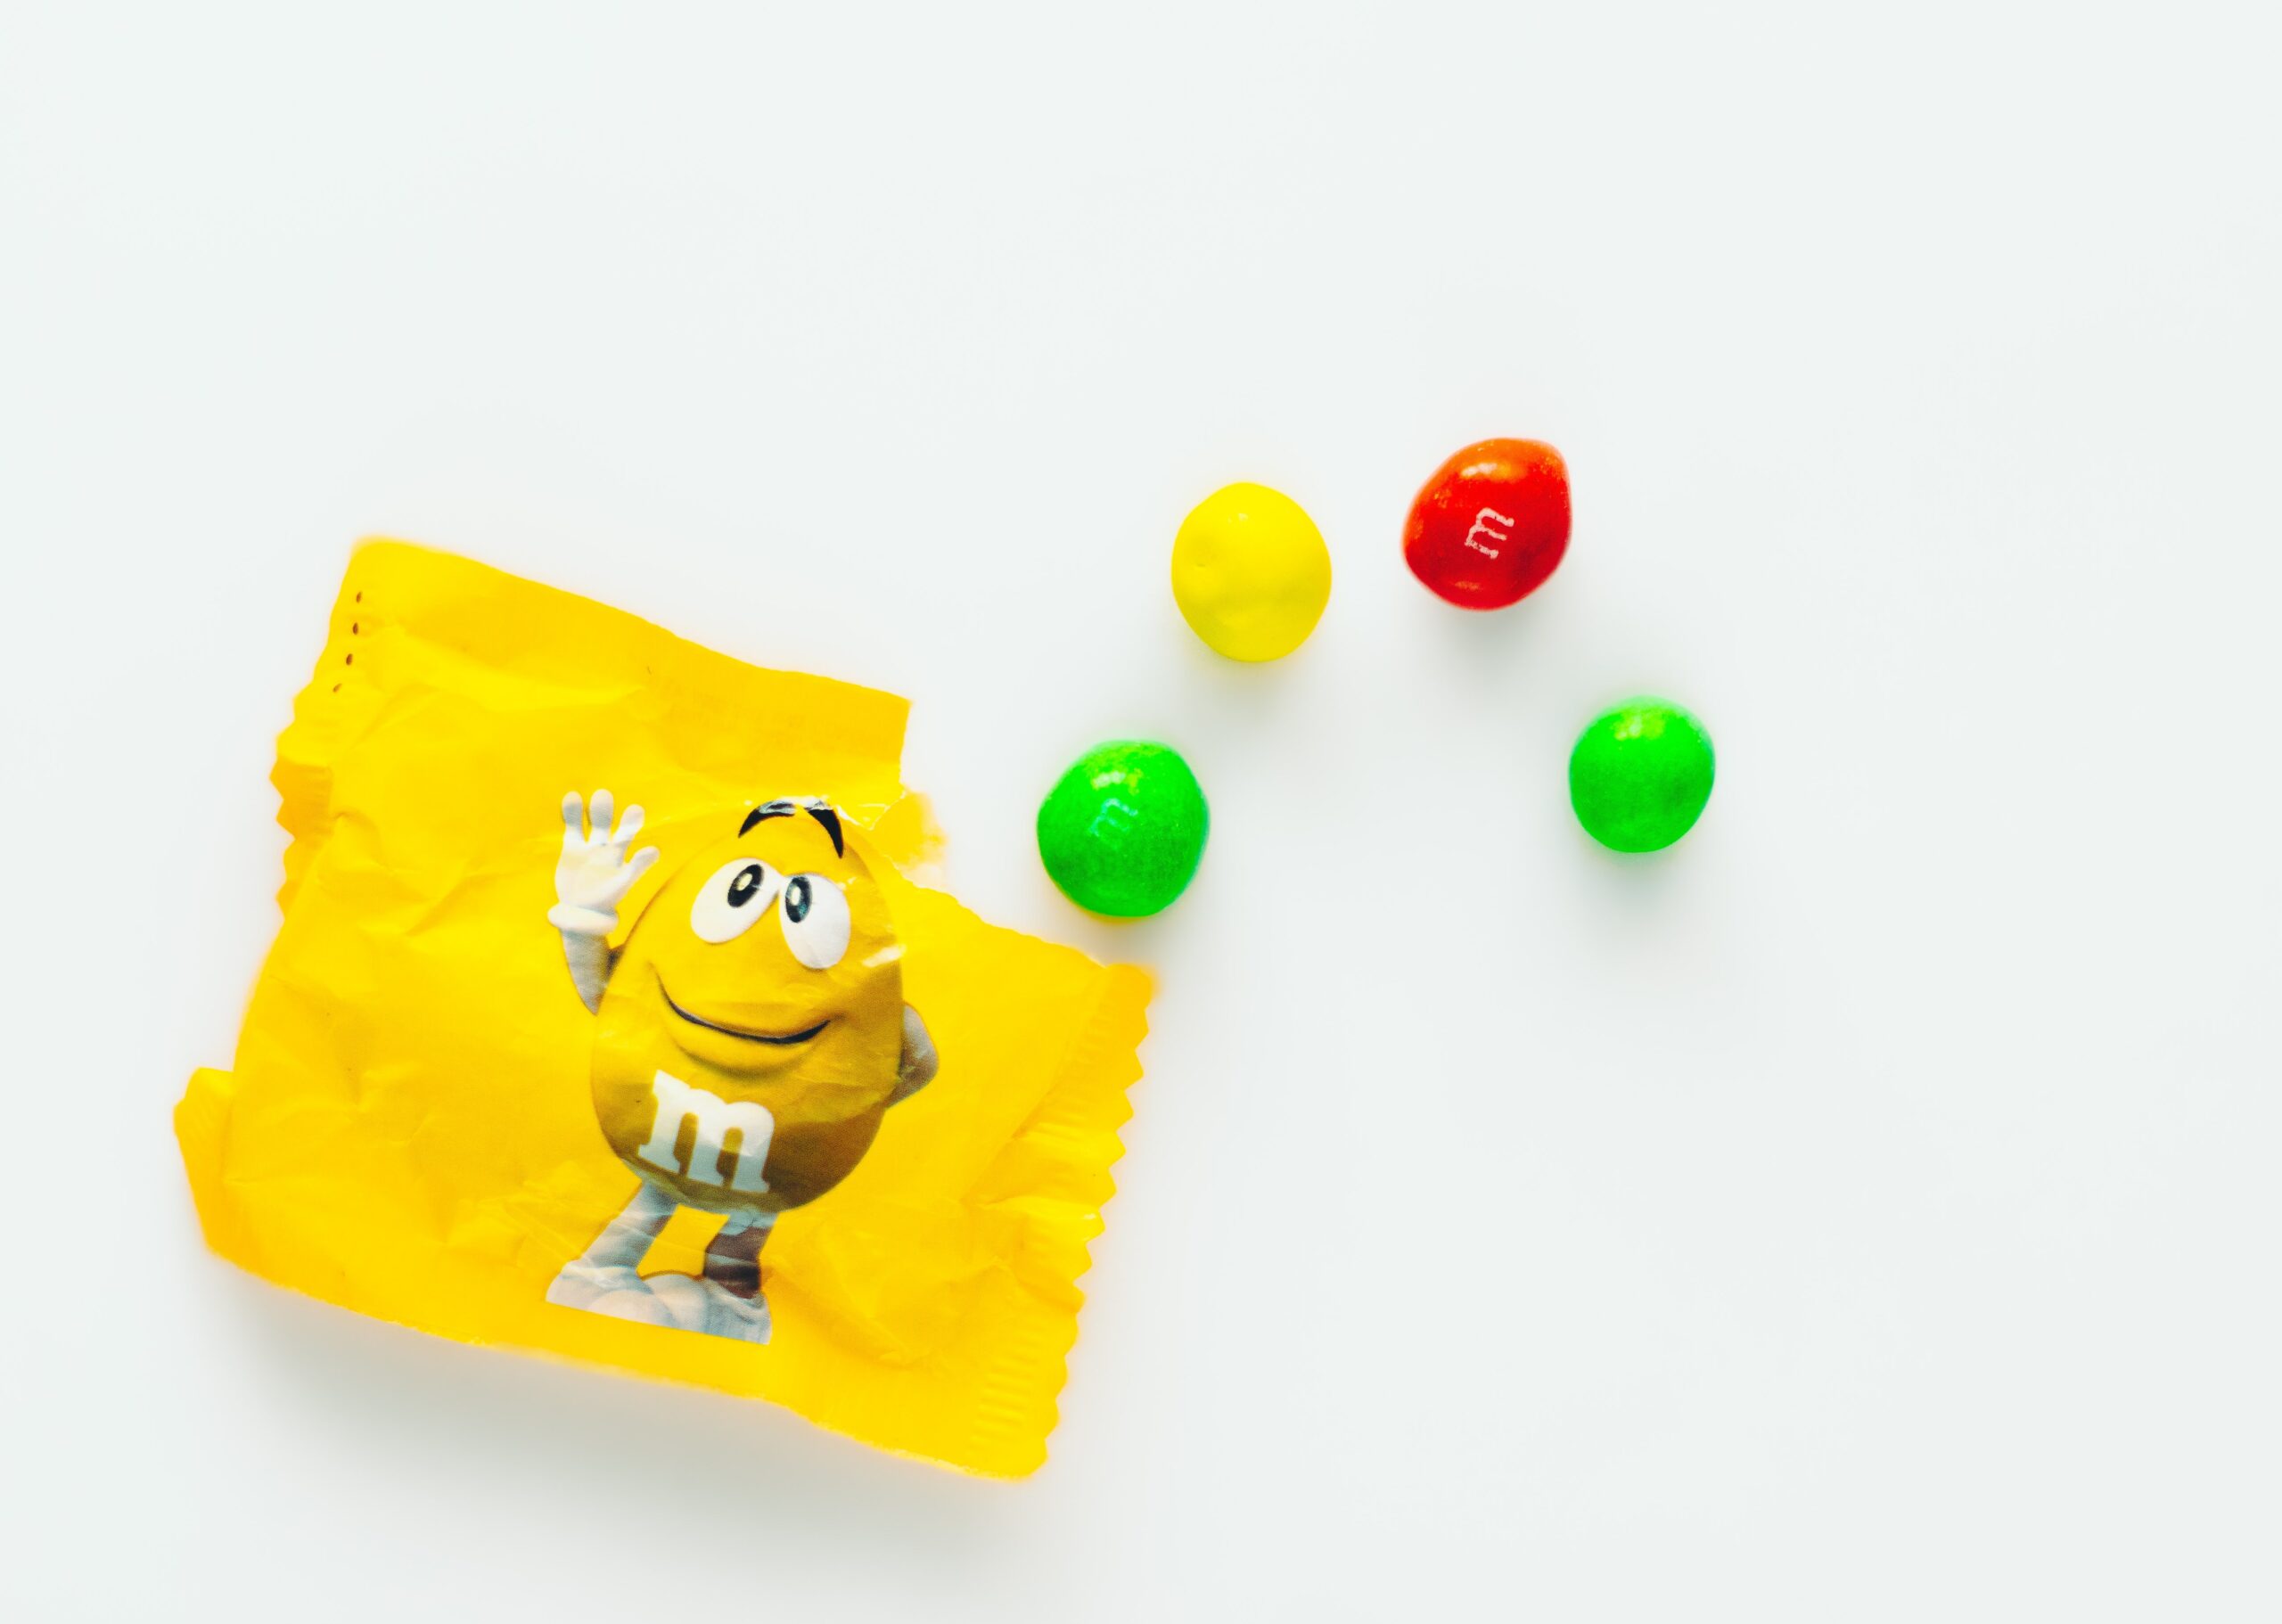 M&Ms go woke with new versions of characters to reflect 'a more